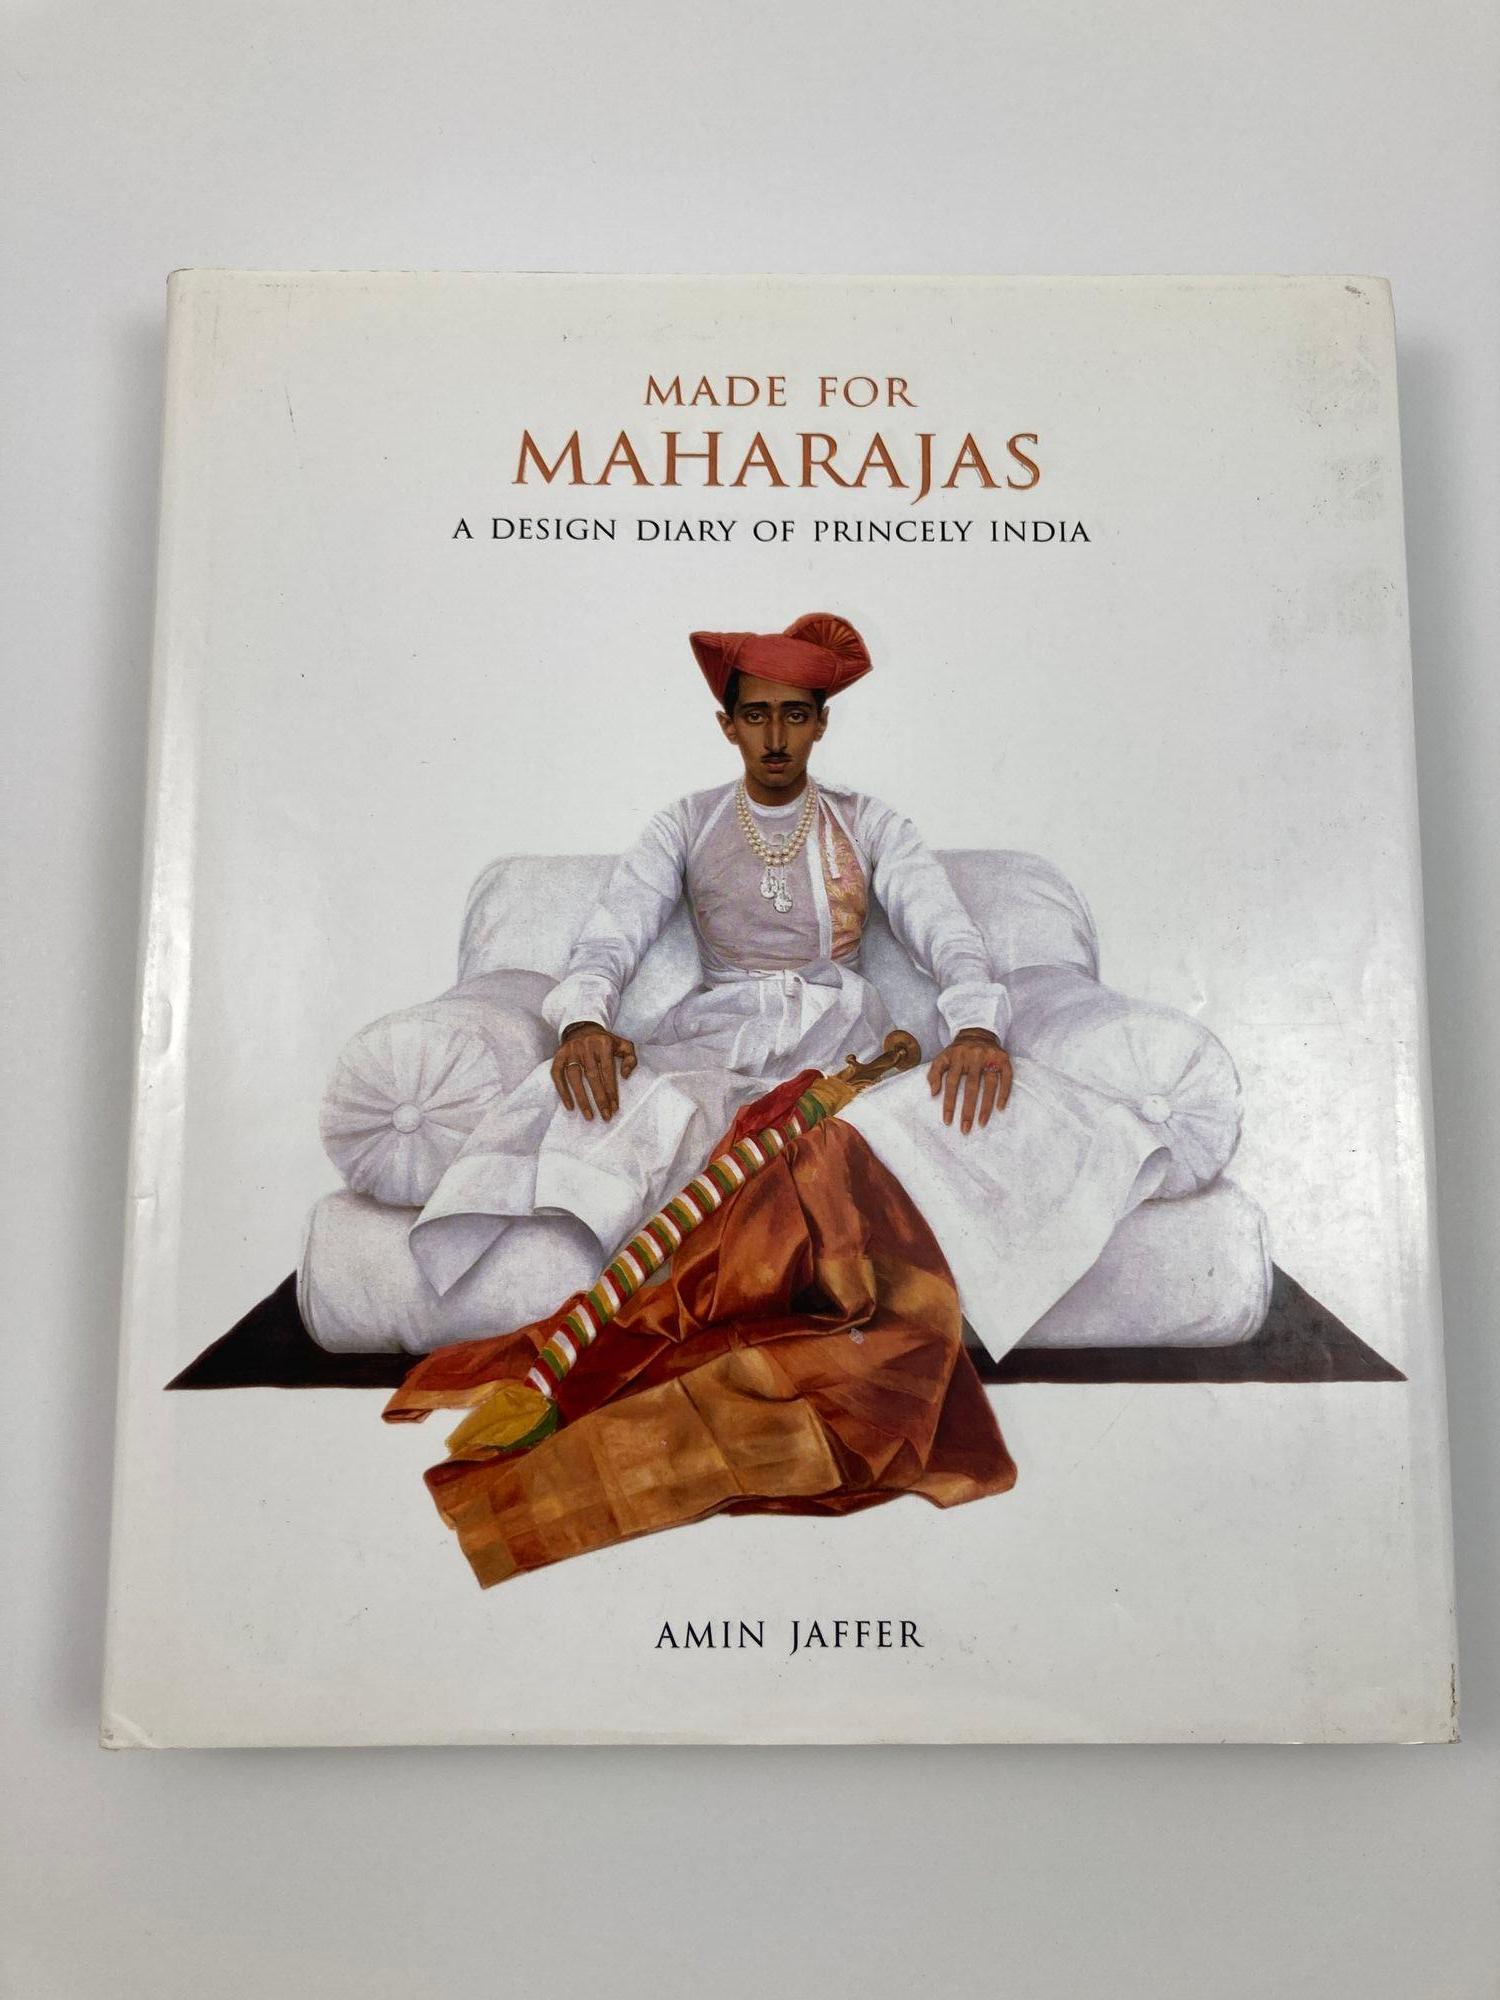 Made for Maharajas A Design Diary of Princely India By Amin Jaffer and Martand Singh.Large hardcover coffee table book 2006.Great condition.Brings together a range of works made for Indian princes by western artistsIndian royalty's passion for